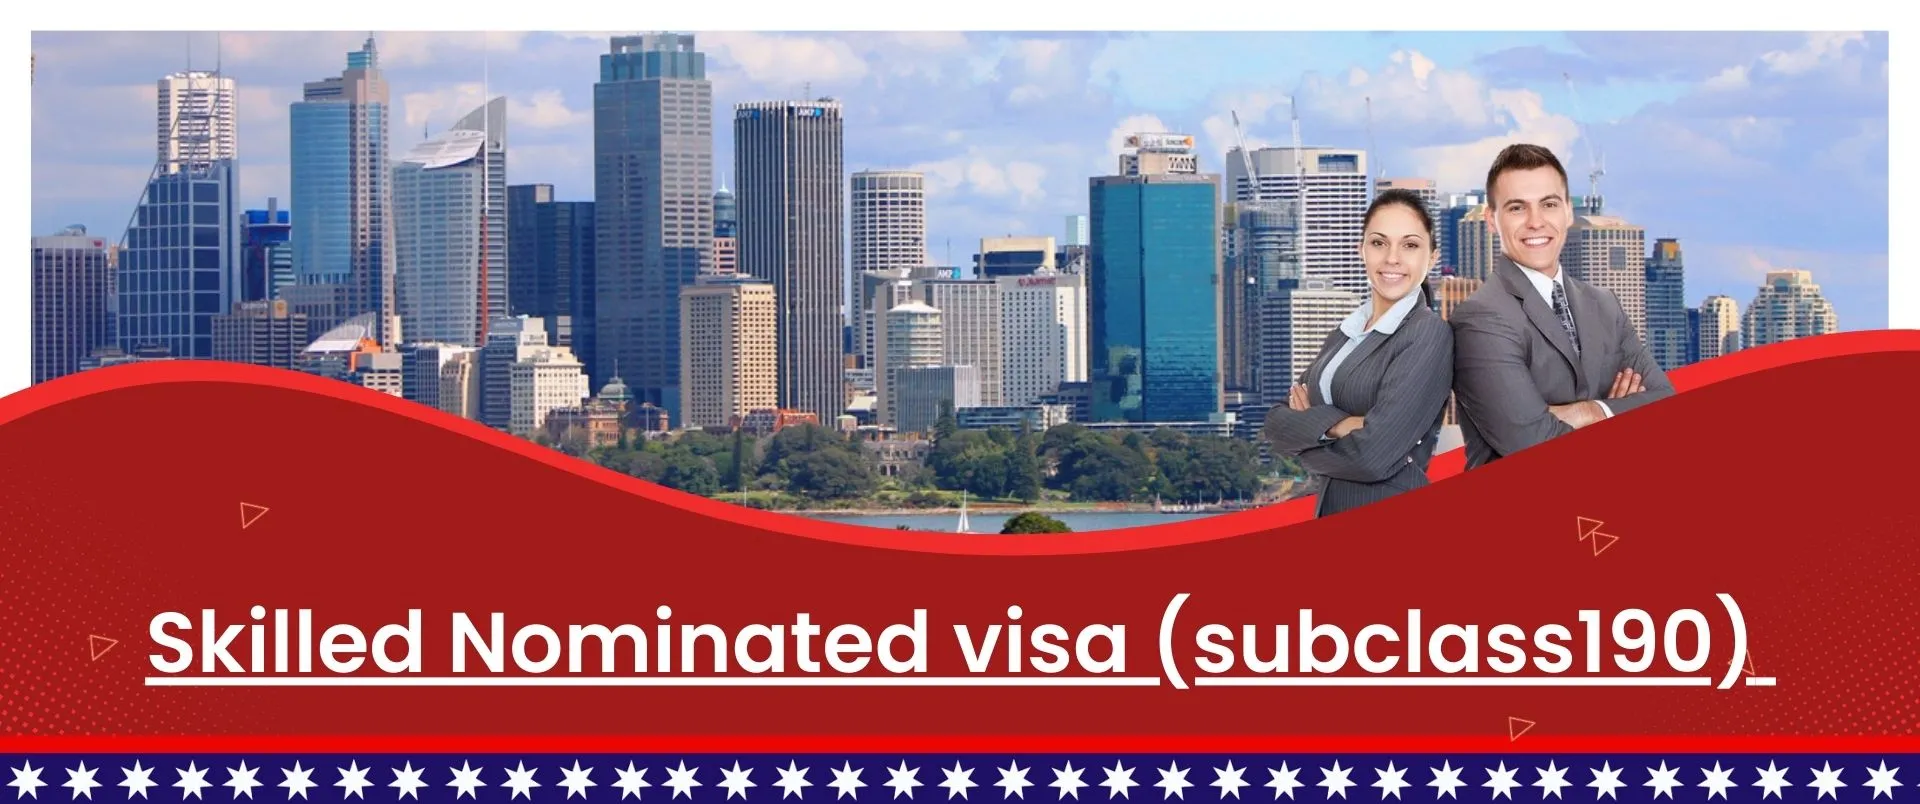 Skilled Nominated (Visa Subclass 190)- Australia PR Visa buildings with standing man and woman